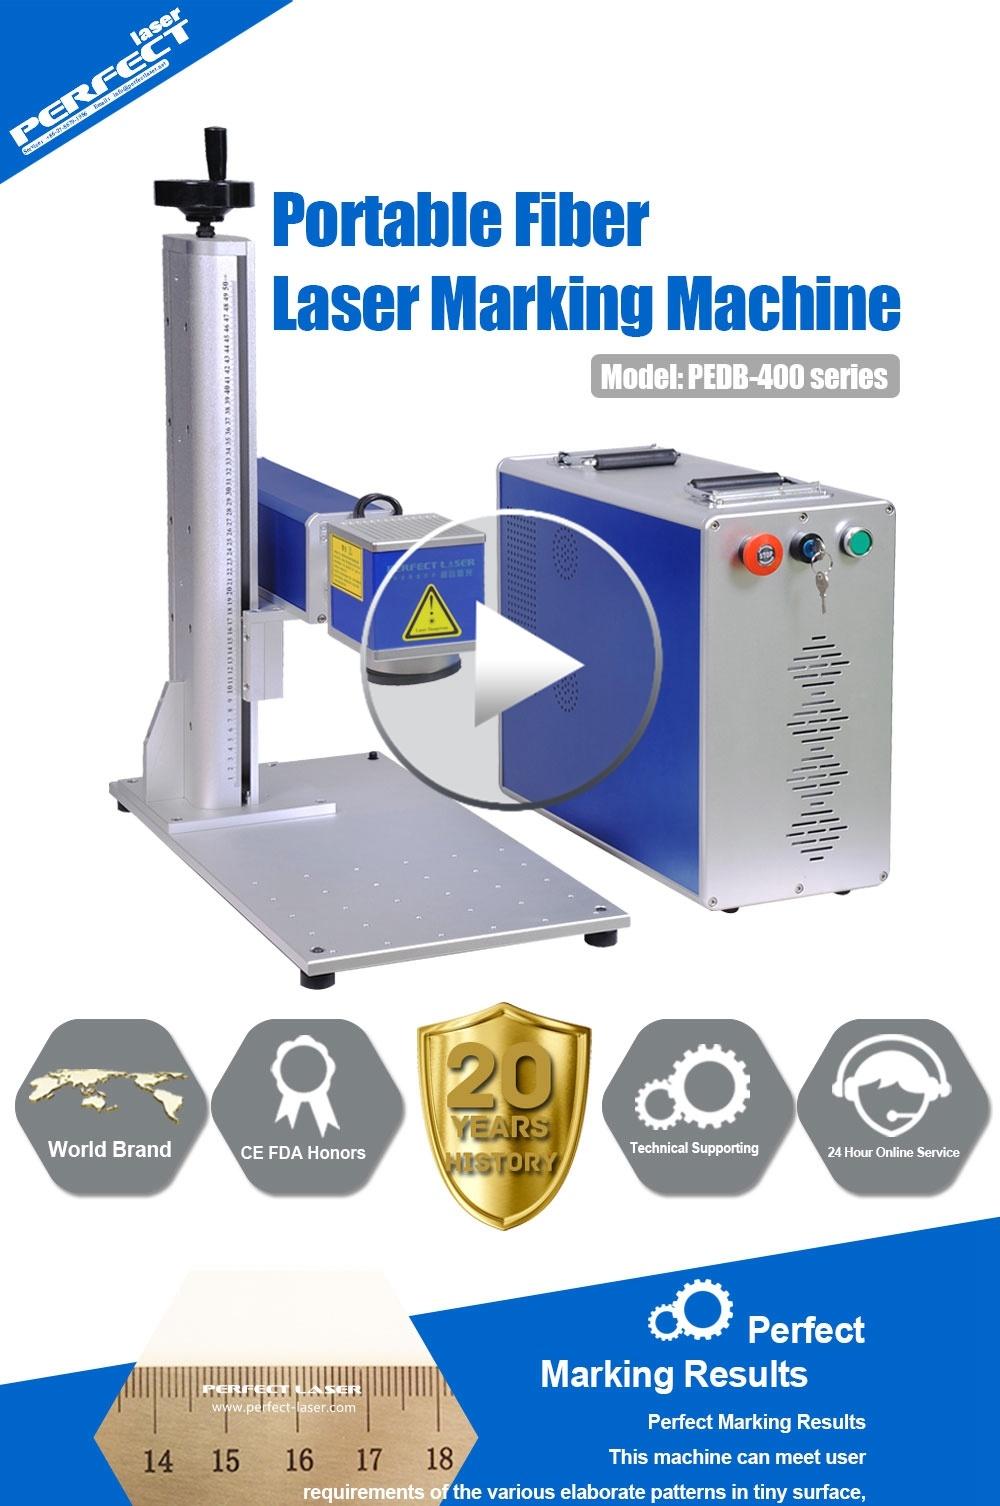 20W 30W 50W Mopa Fiber Laser Marking Engraving Machine for Necklace Ring Jewelry